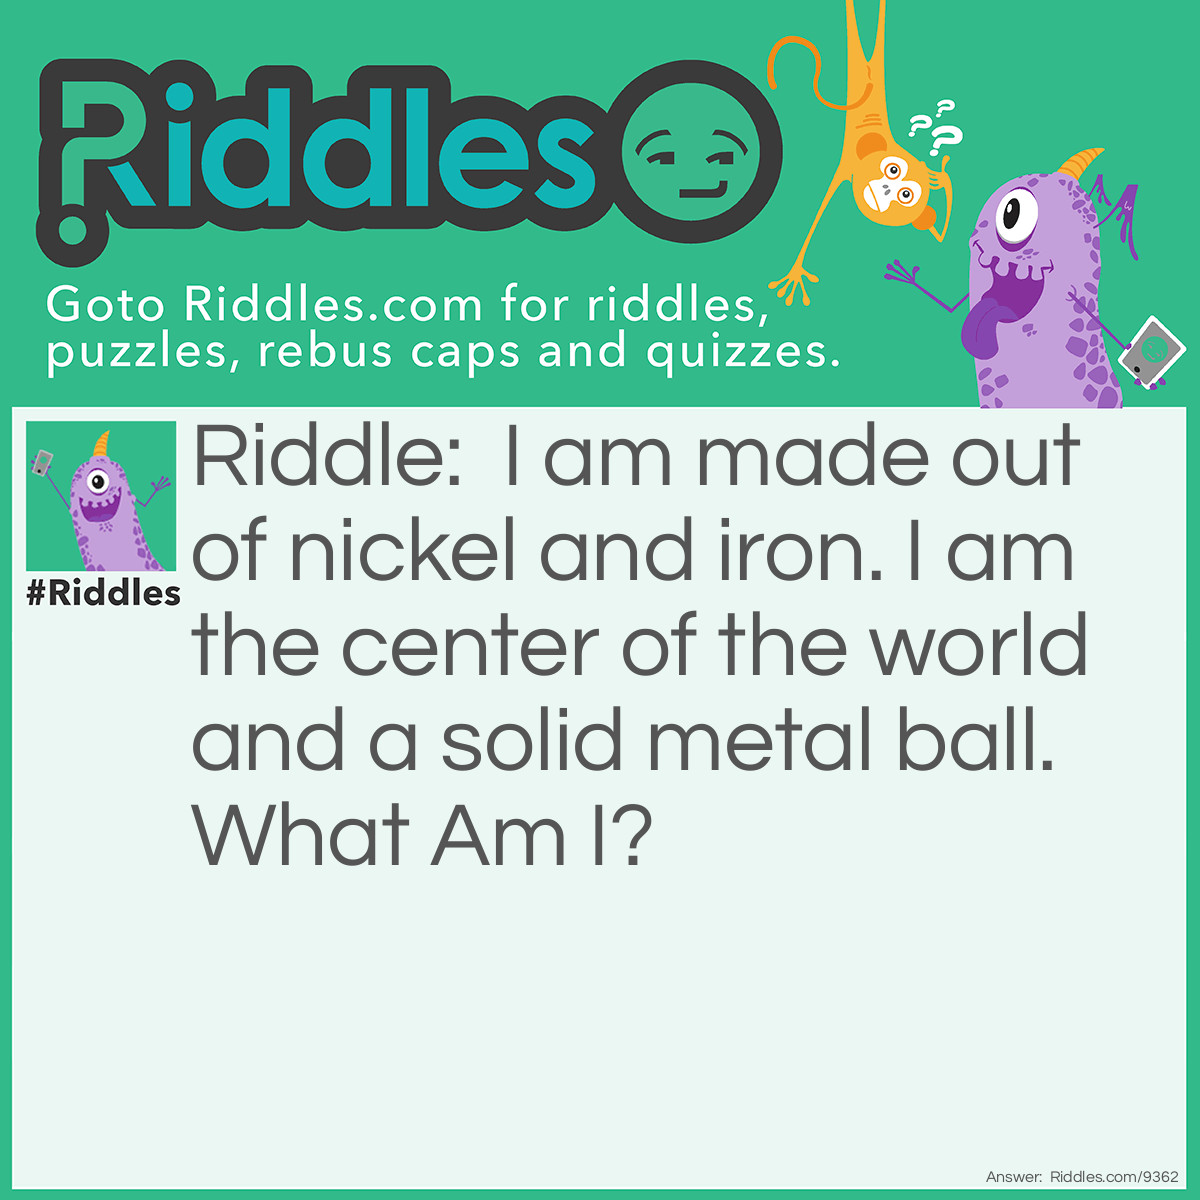 Riddle: I am made out of nickel and iron. I am the center of the world and a solid metal ball. What Am I? Answer: Inner core.